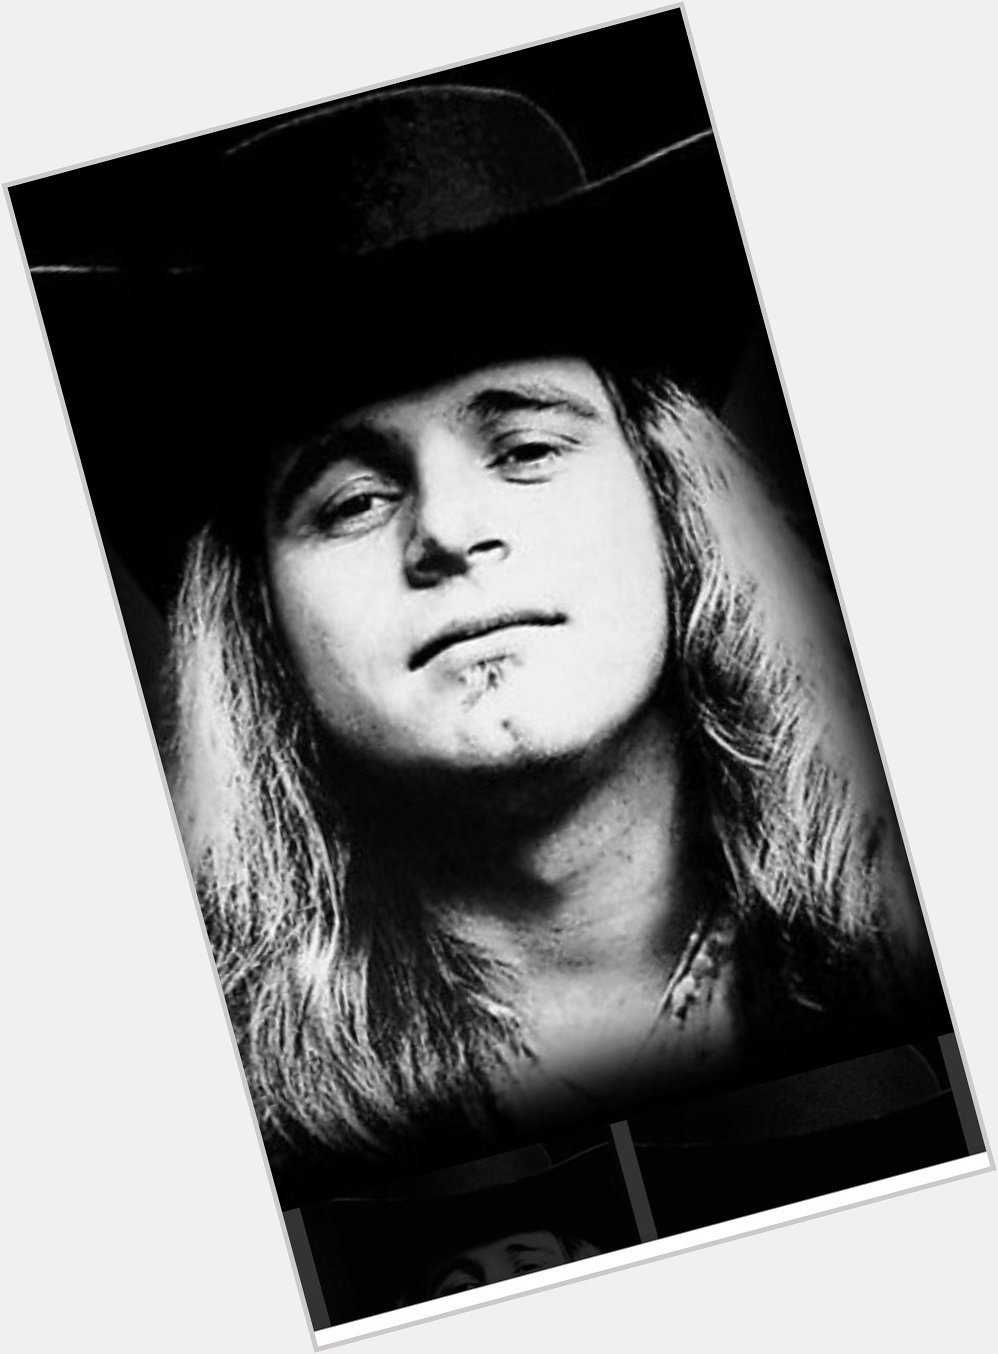 Happy birthday to rock legend and royalty Ronnie Van Zant. You set the bar my friend! 